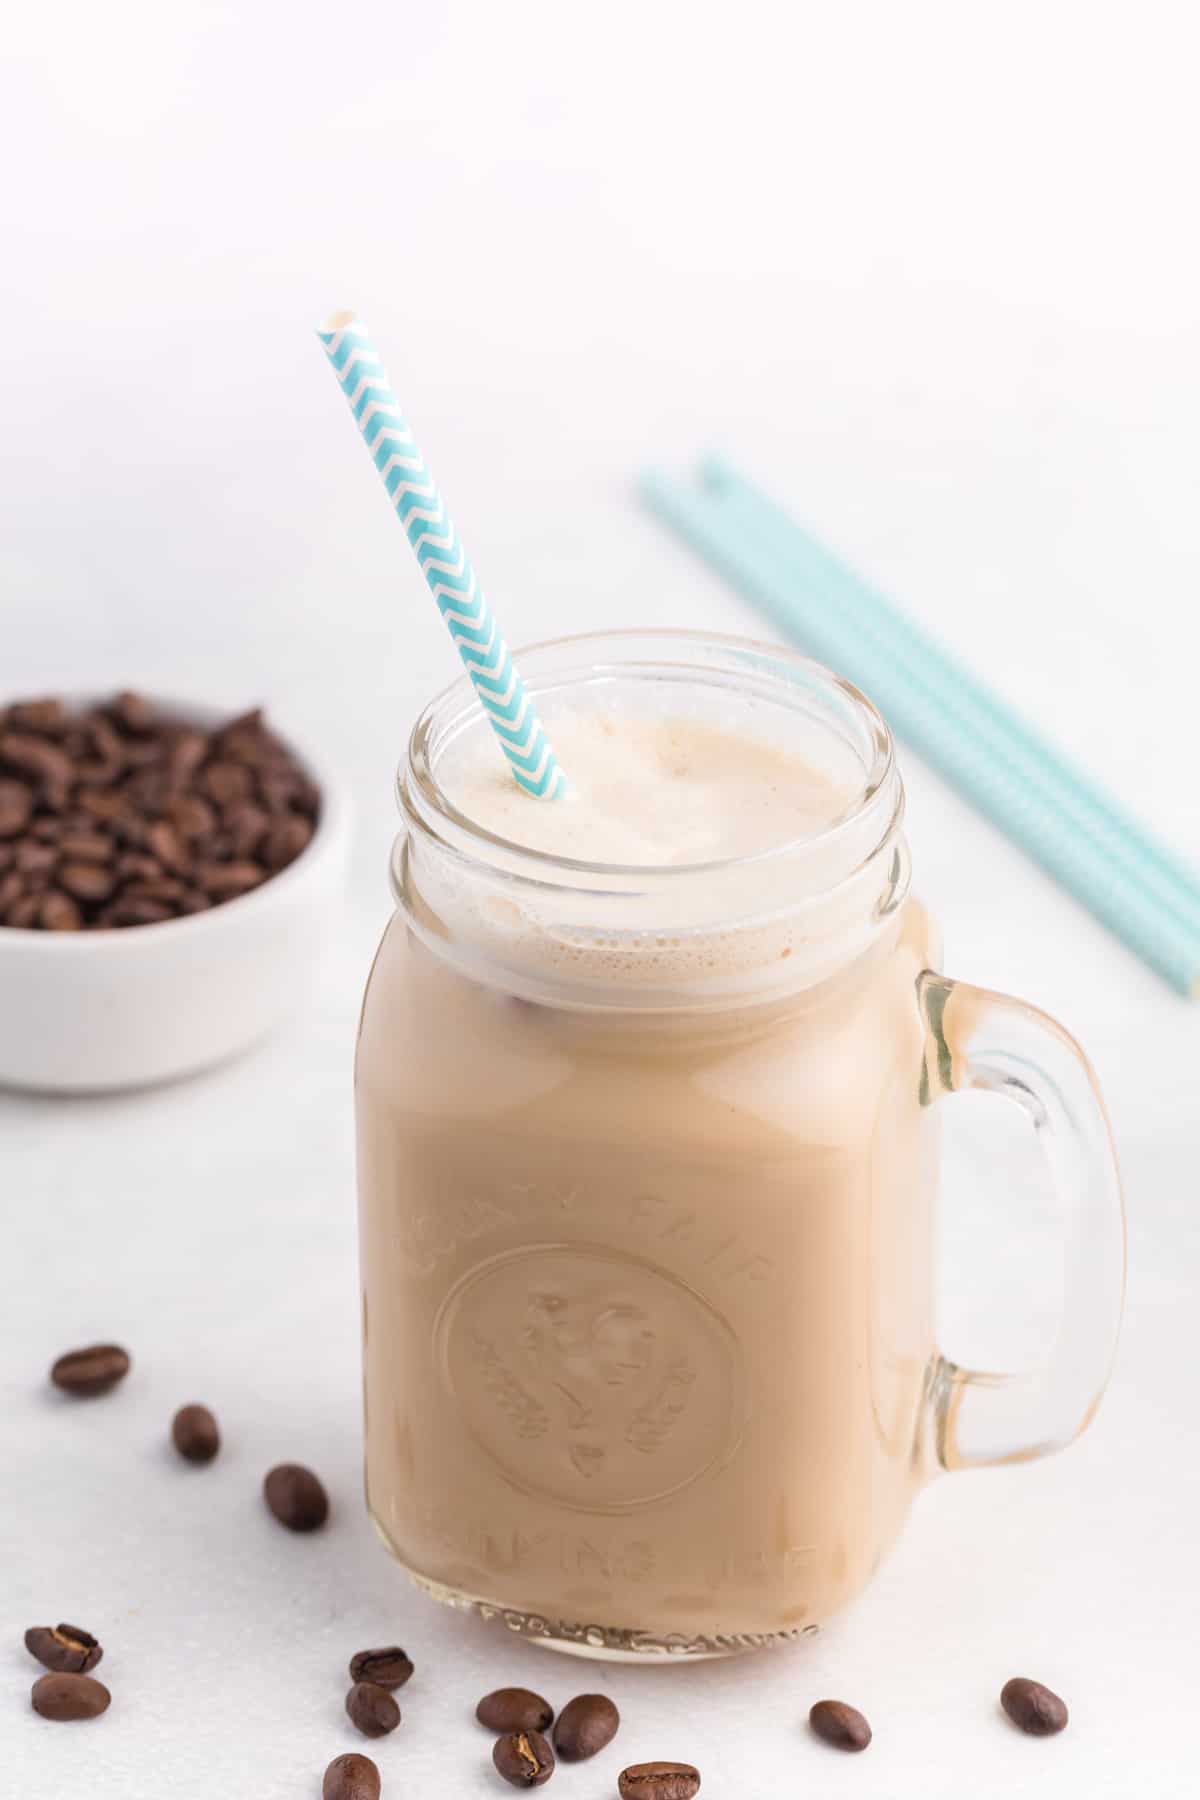 A glass jar with iced coffee and a straw.